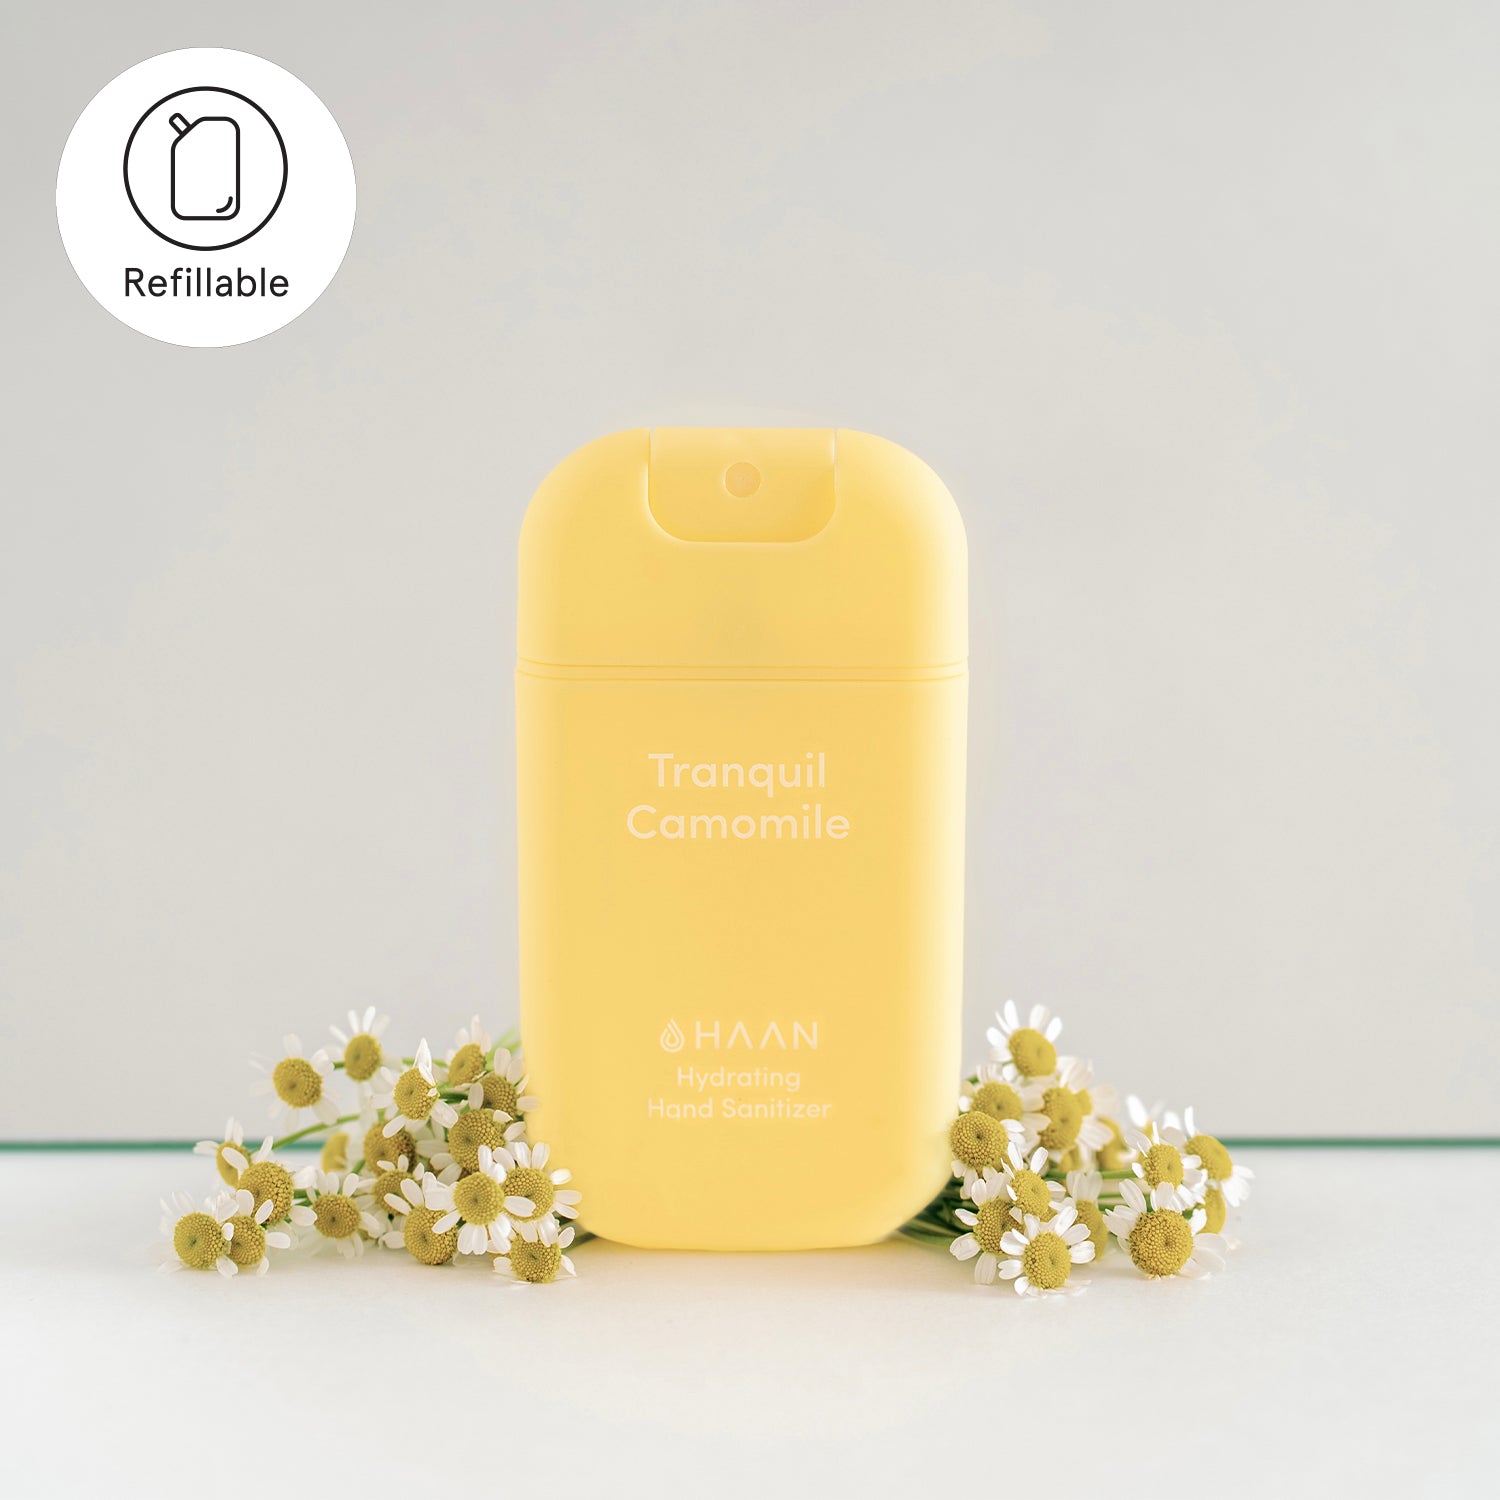 HAAN - Hand sanitizer Tranquil Camomile 30ml